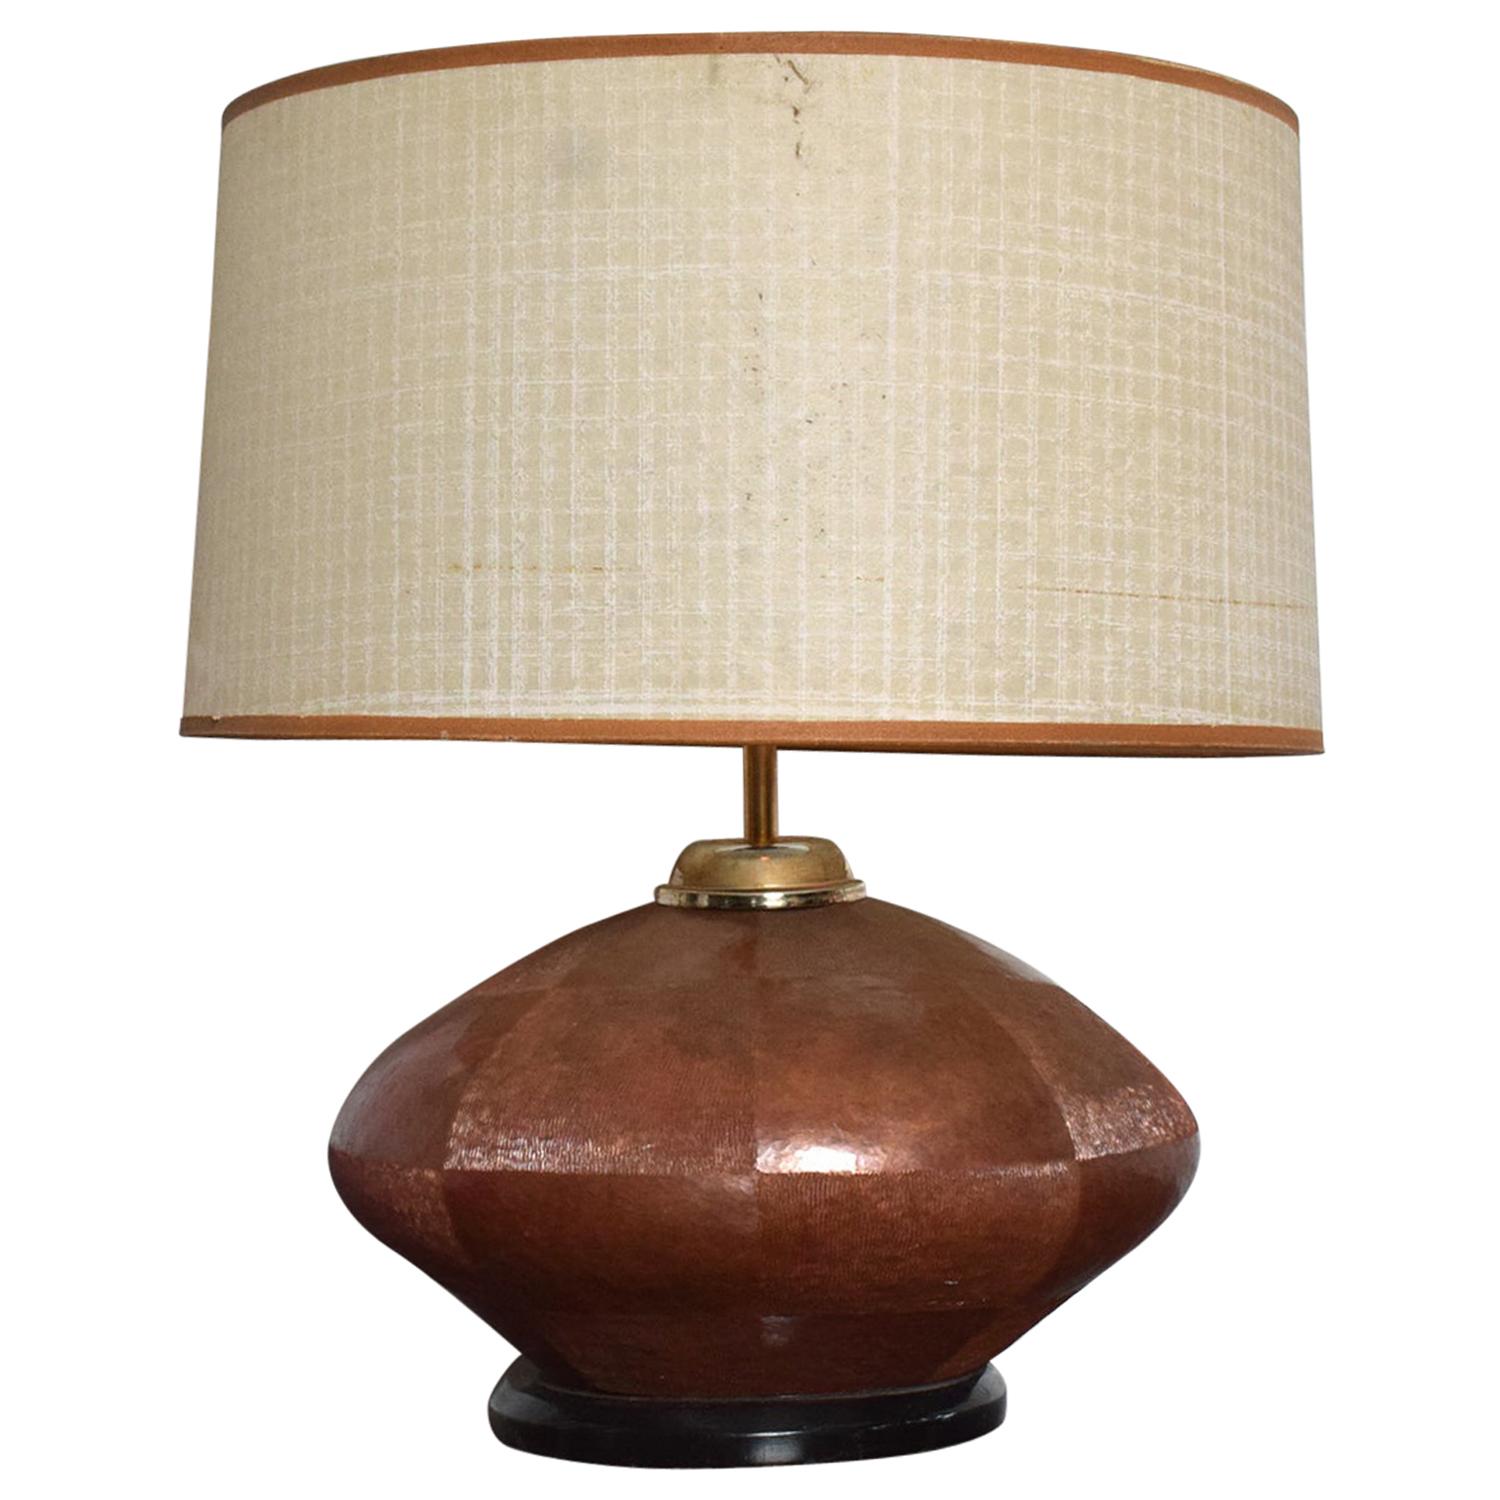 1970s Texturized Table Lamp Patinated Copper Bentwood Base 
base painted in black Brass hardware.
Lamp is bulbous oval shape. 
Made in Mexico Style of Luis Barragan.
19 T x 14.5 W x 11.5 D 
Original Vintage Unrestored Preowned Condition. 
Lampshade